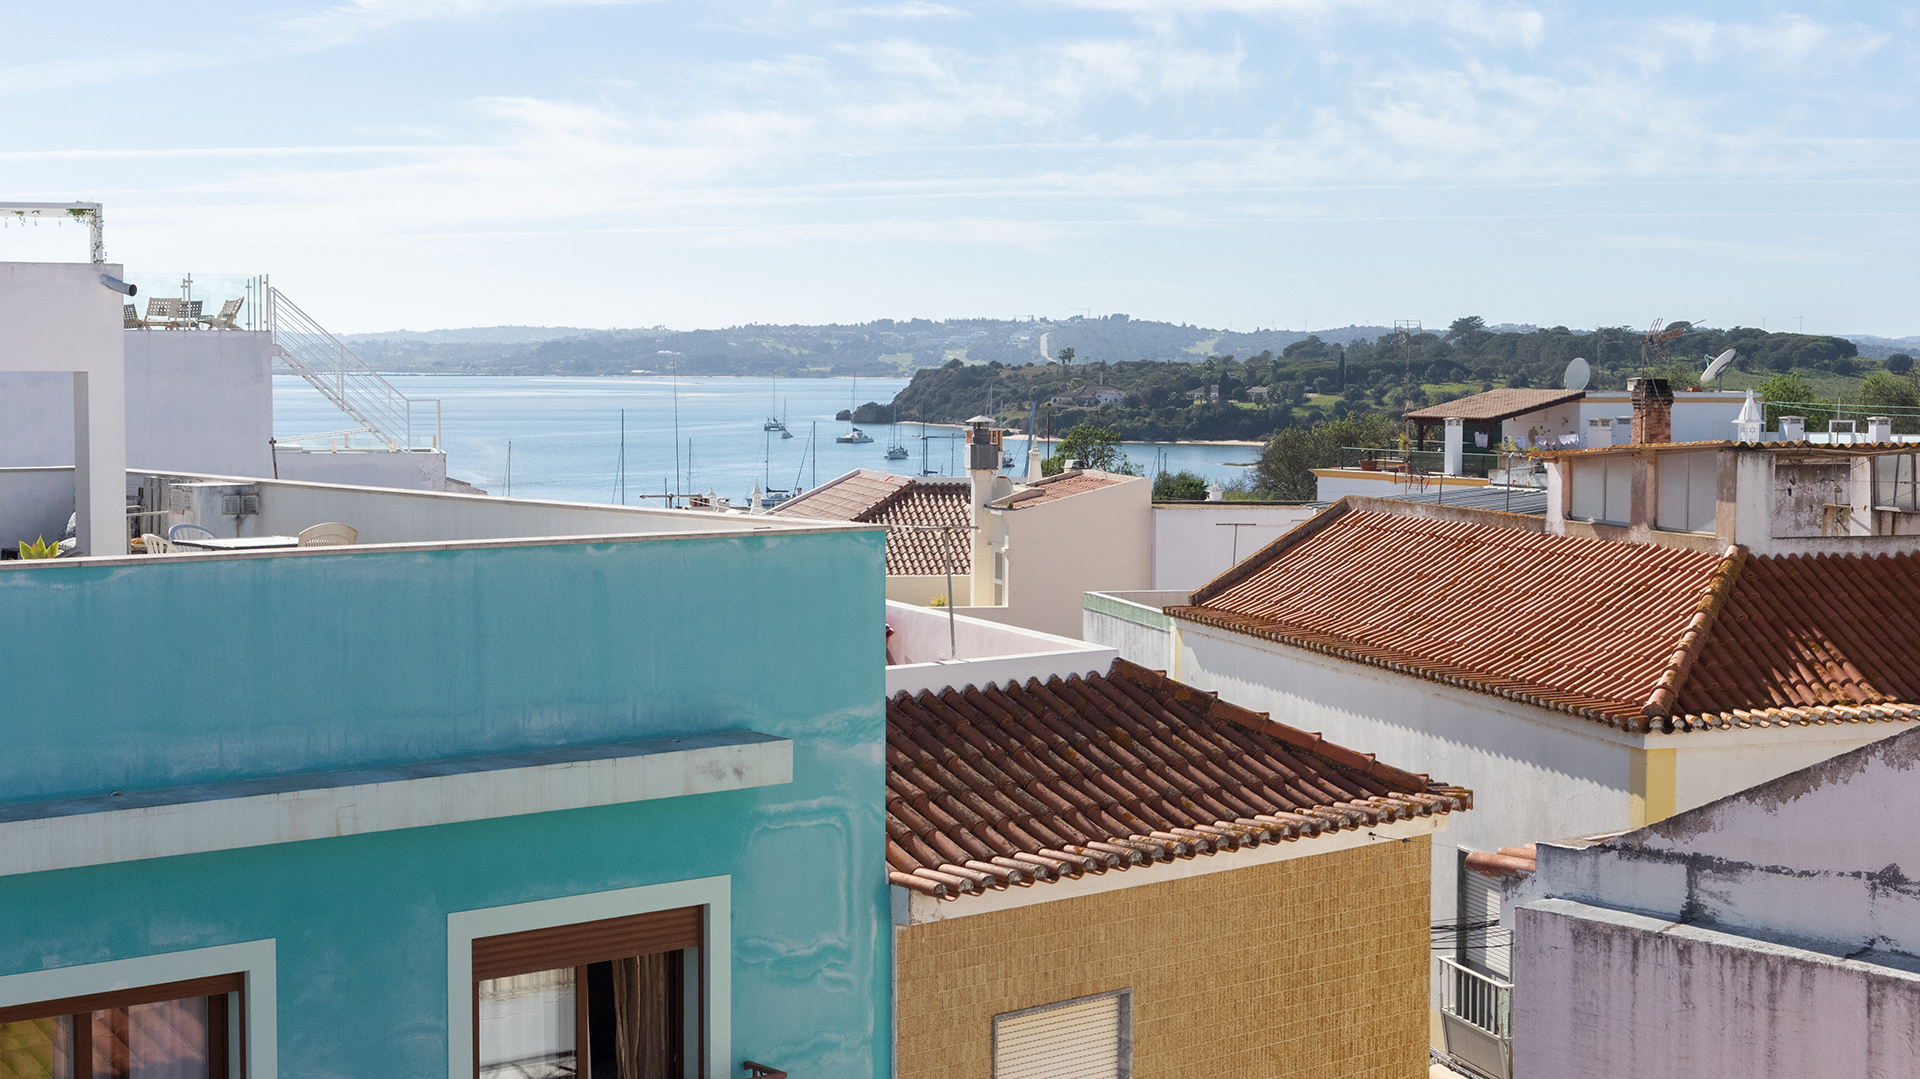 Traditional townhouse with 3 bedrooms and large roof terraces with views, Alvor  | LG2085 Renovated, traditional Portuguese townhouse in the heart of Alvor, with 3 bedrooms and 2 bathrooms and 2 roof terraces offering wonderful views over this beautiful Algarve fishing town.